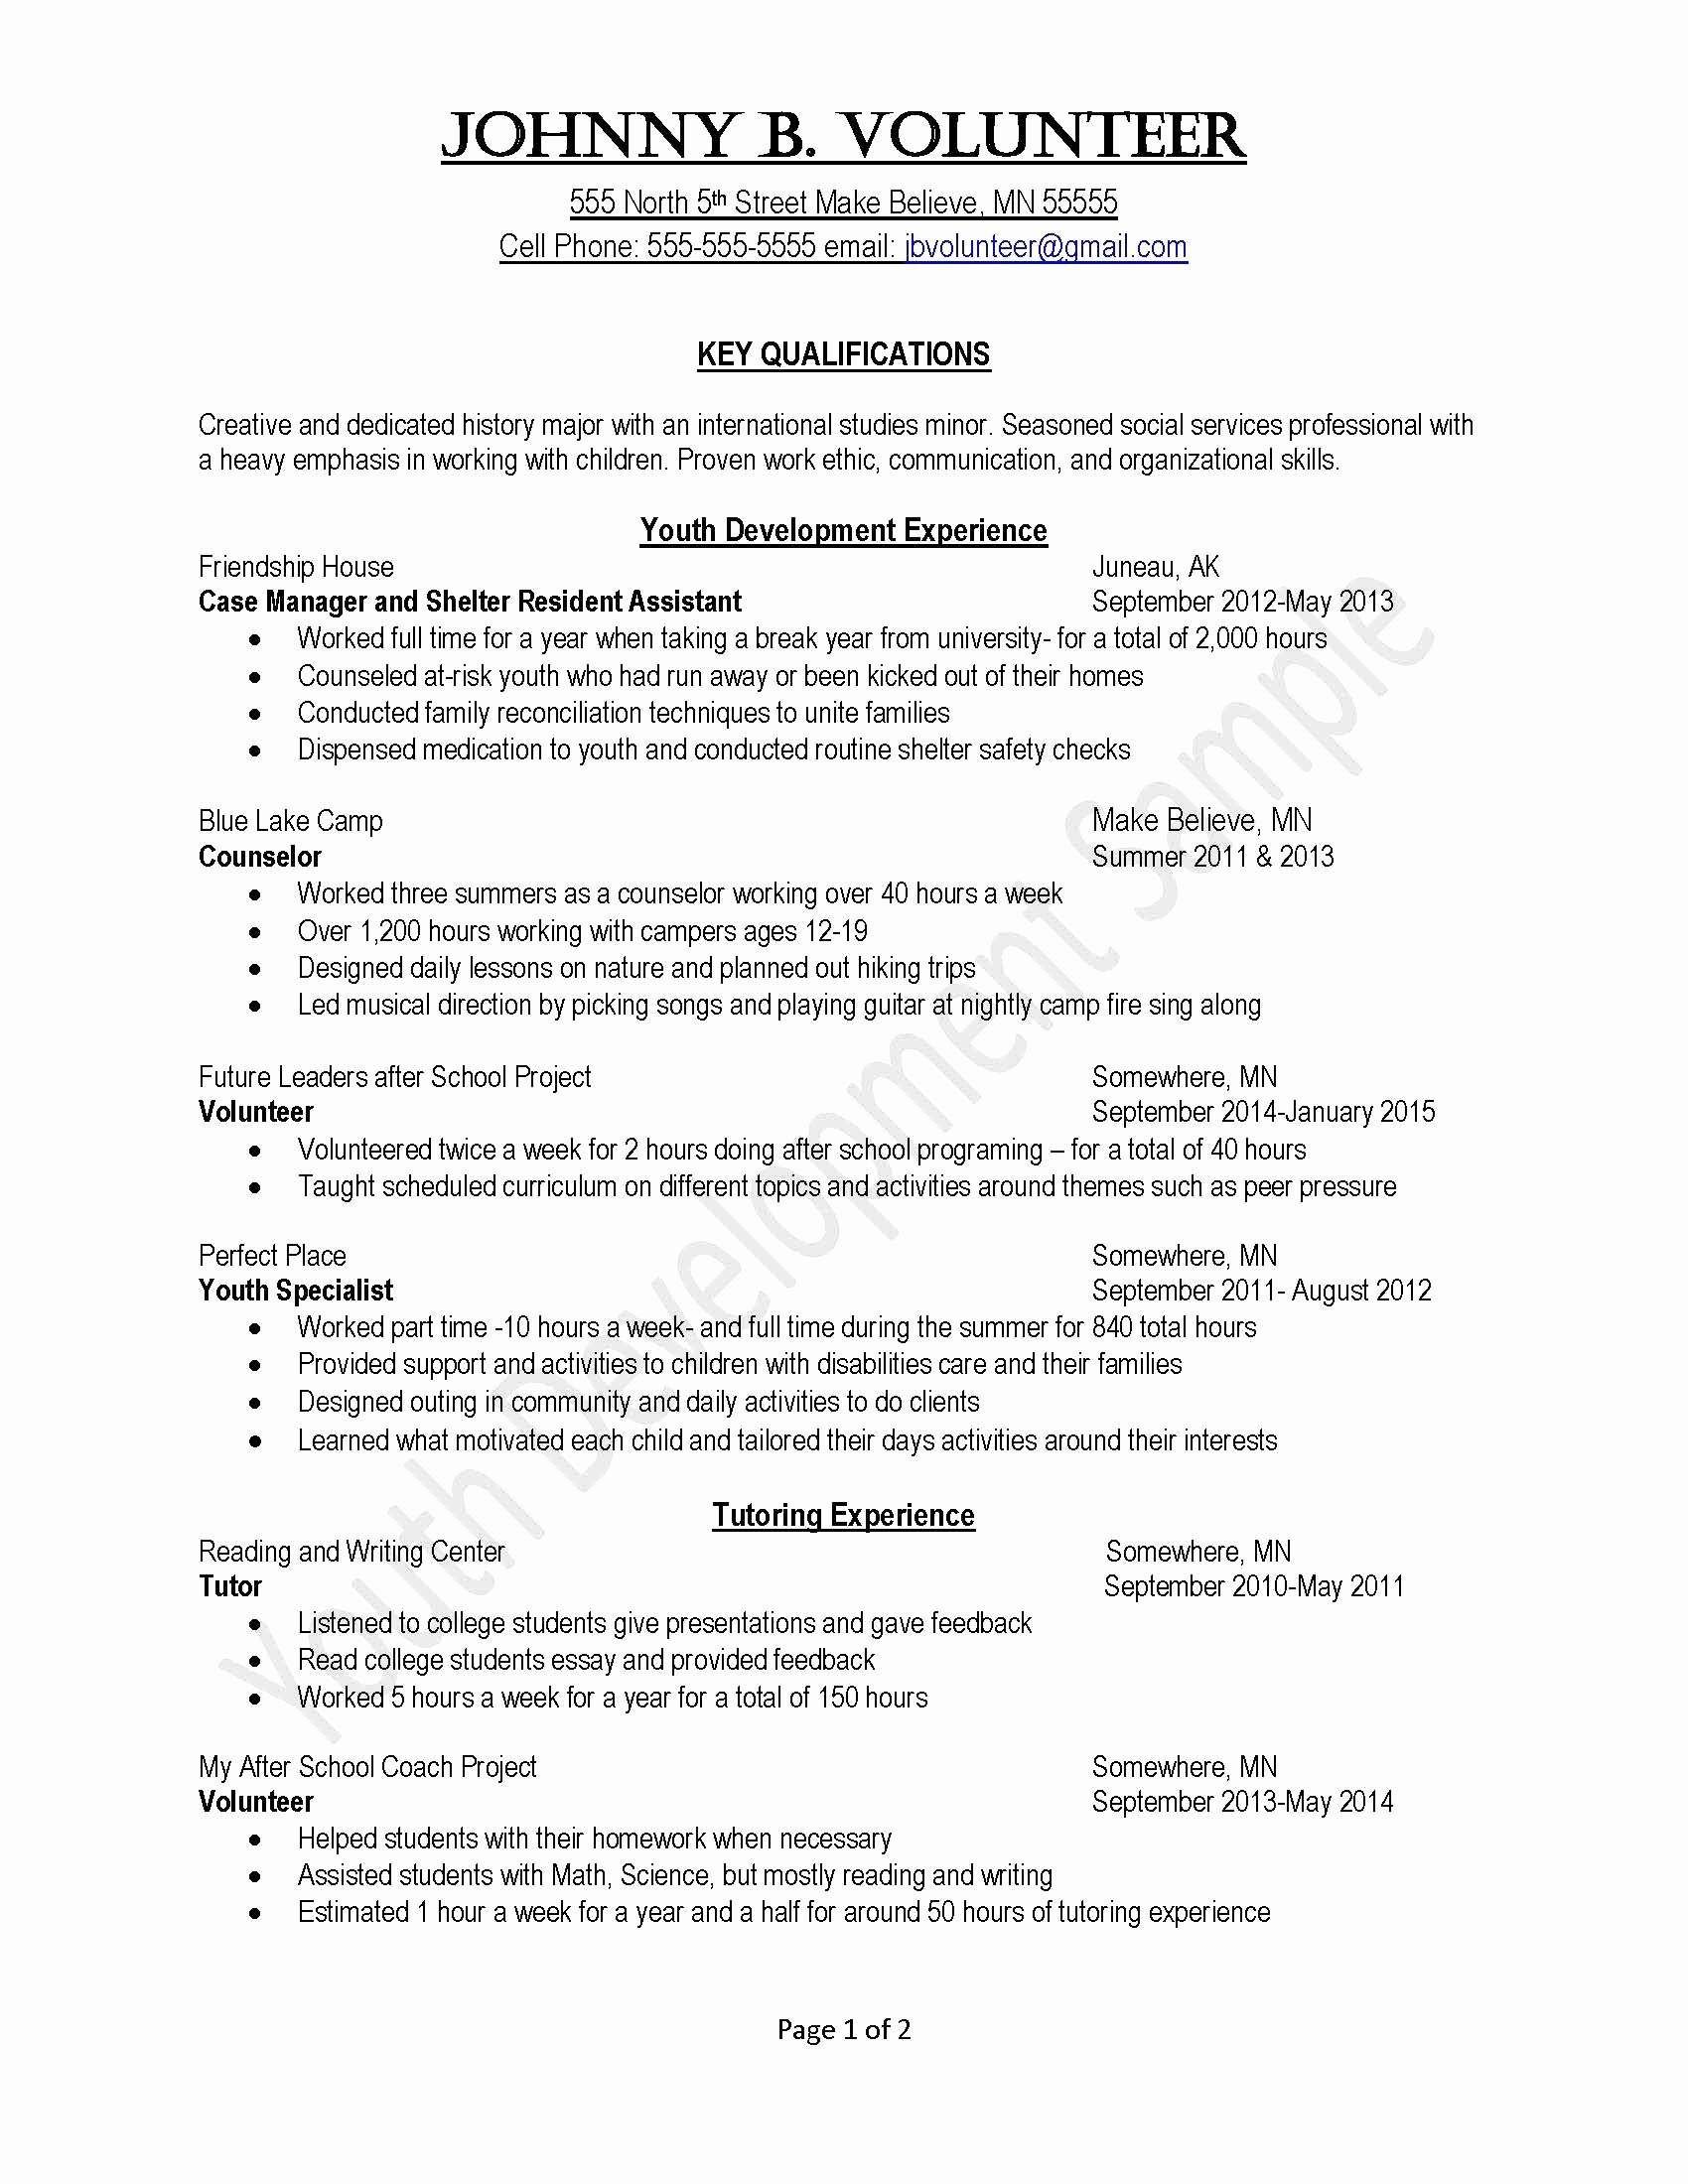 Resume Objective Example Fast Food Resume Objective resume objective example|wikiresume.com